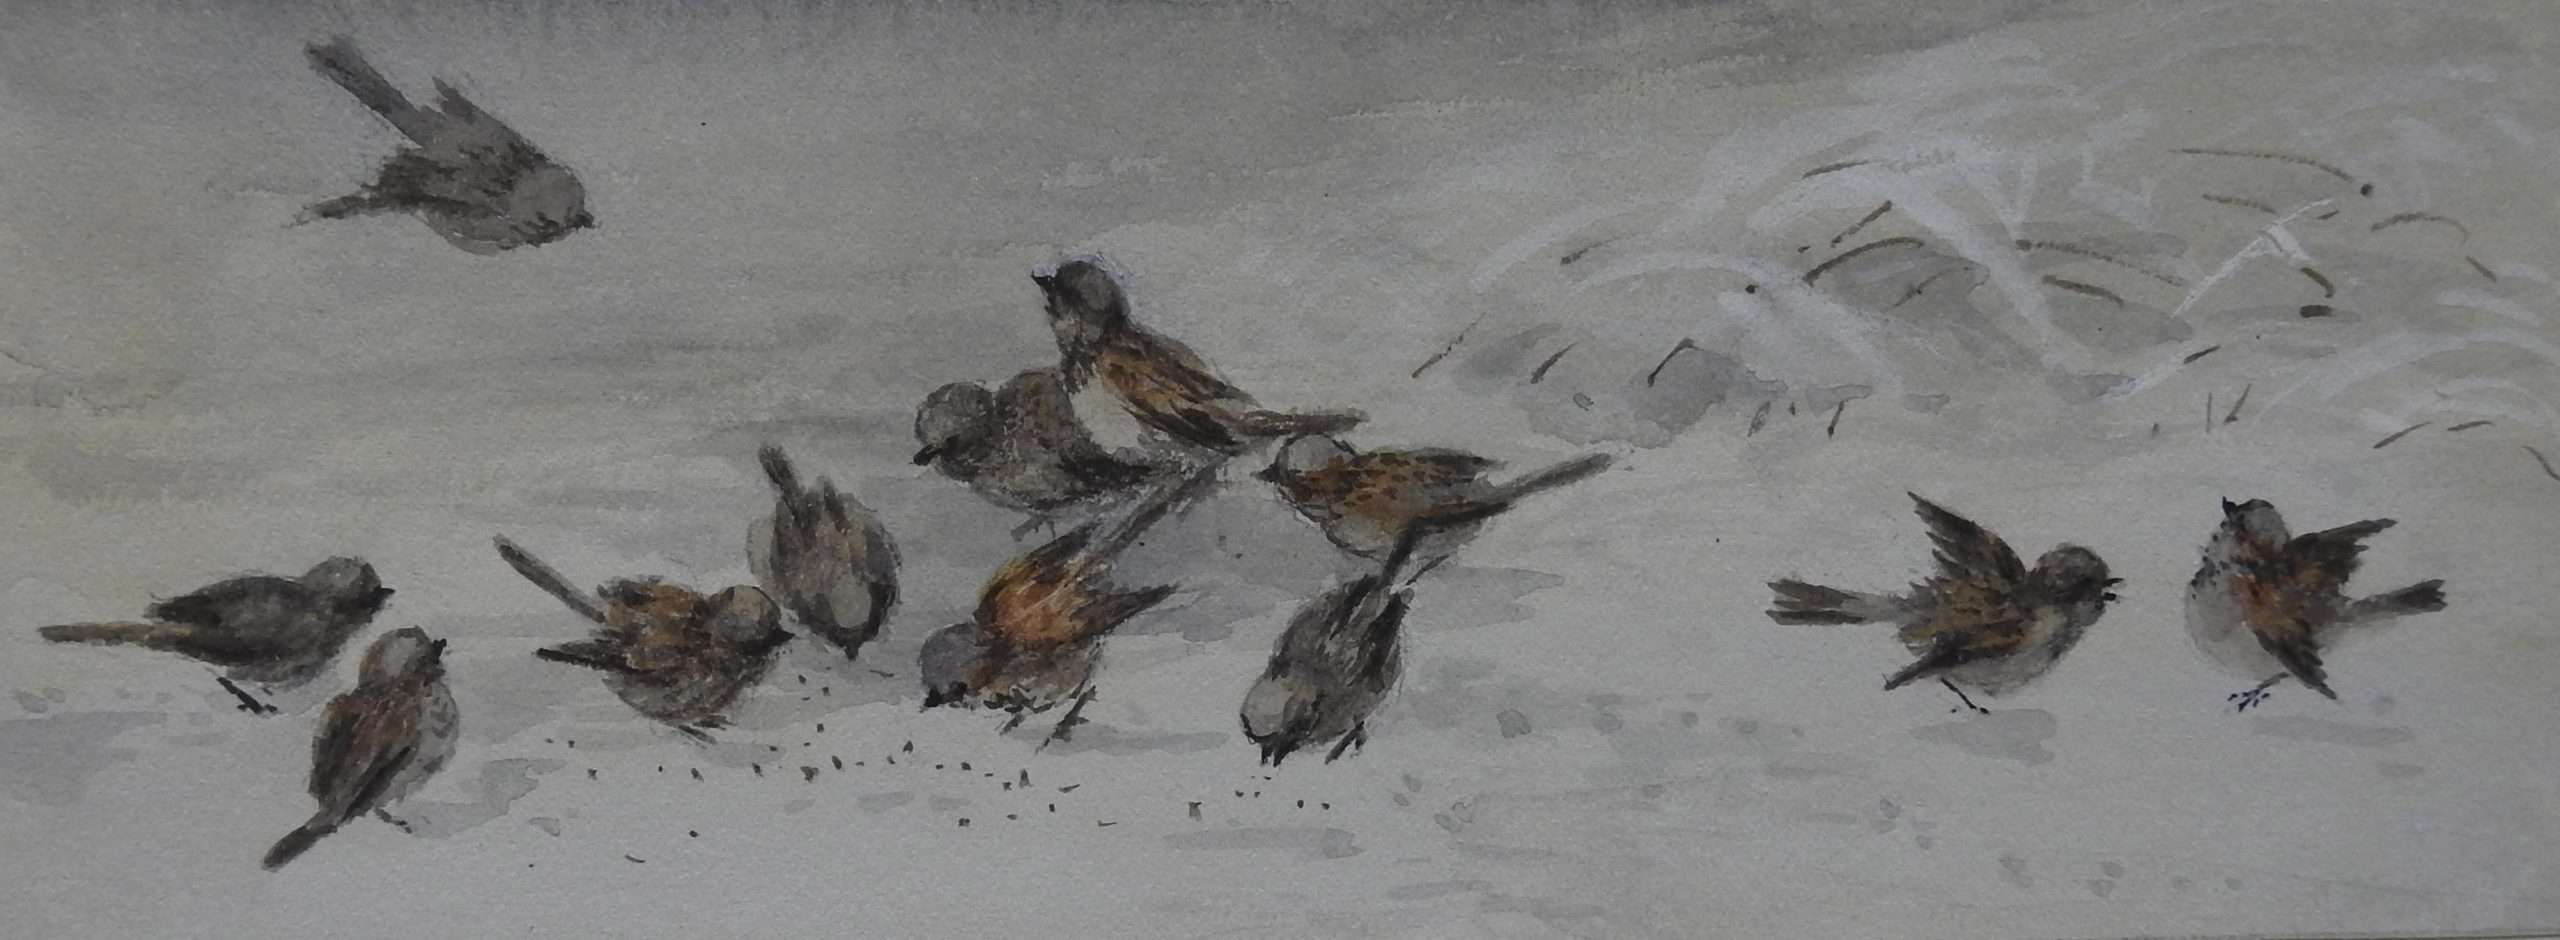 A flock of birds pecking at the snow to find seeds.